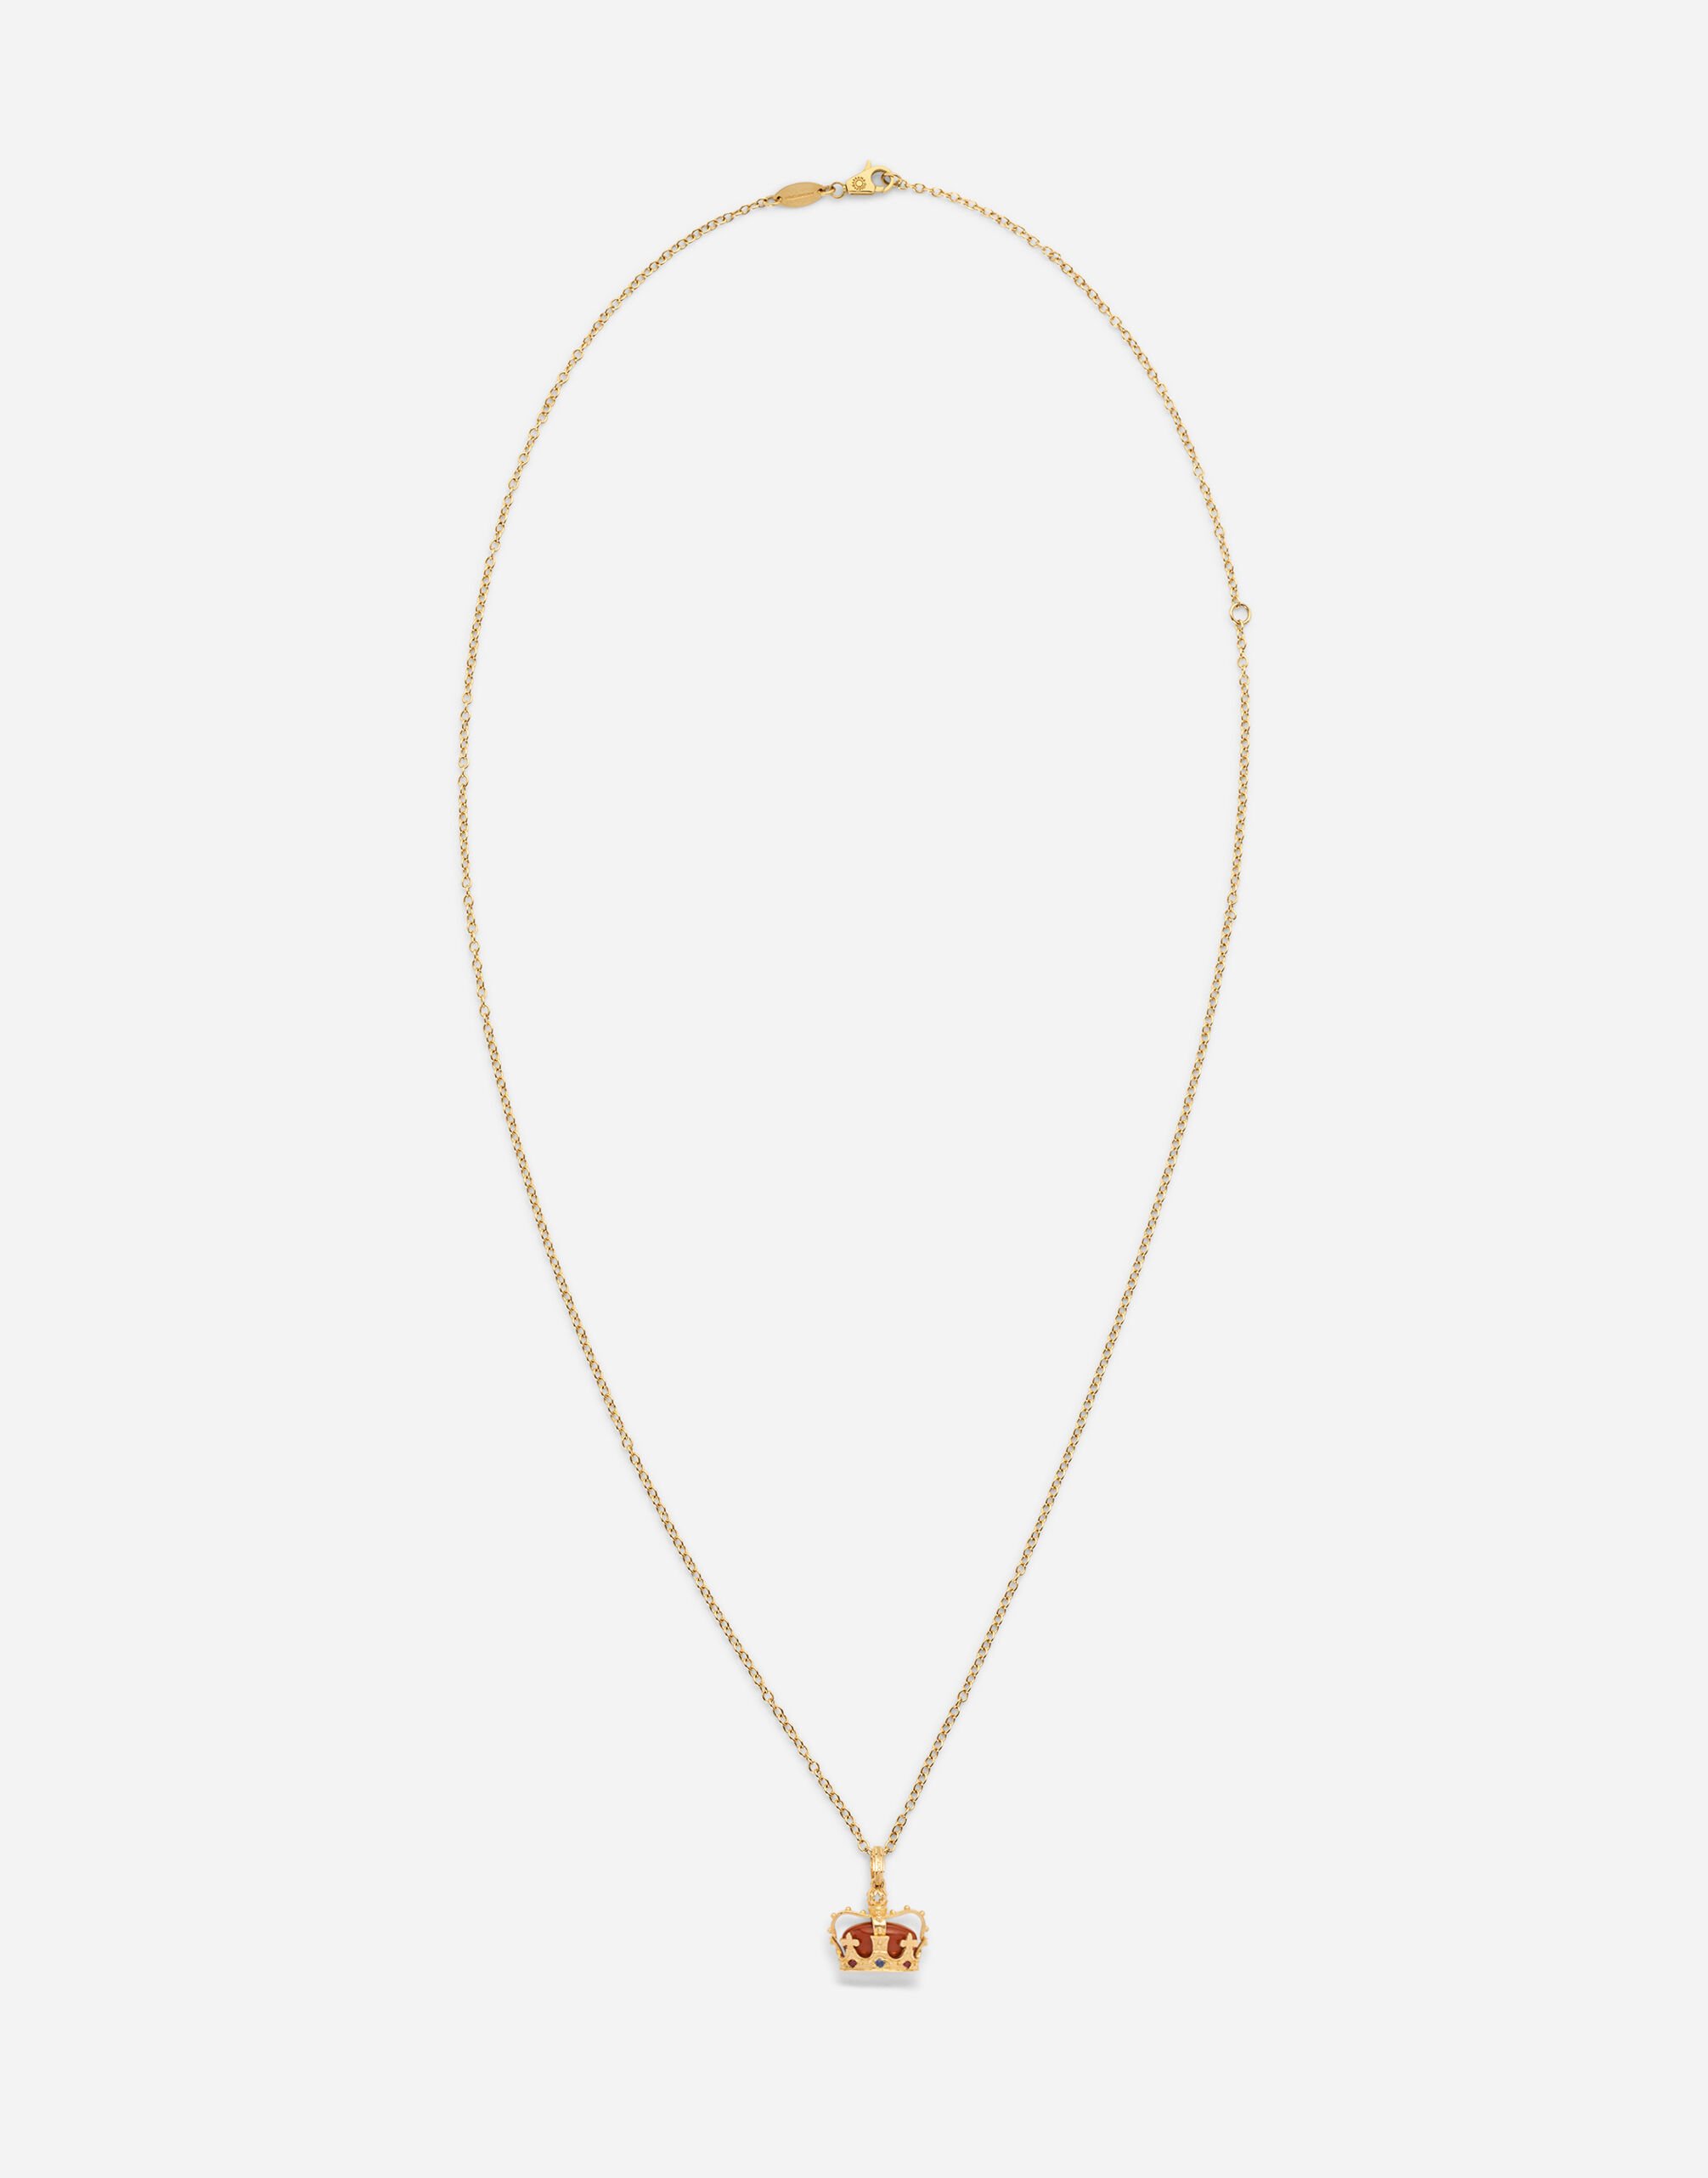 Dolce & Gabbana Crown yellow gold crown pendant with red jasper on the inside Gold WRLK1GWJAS1